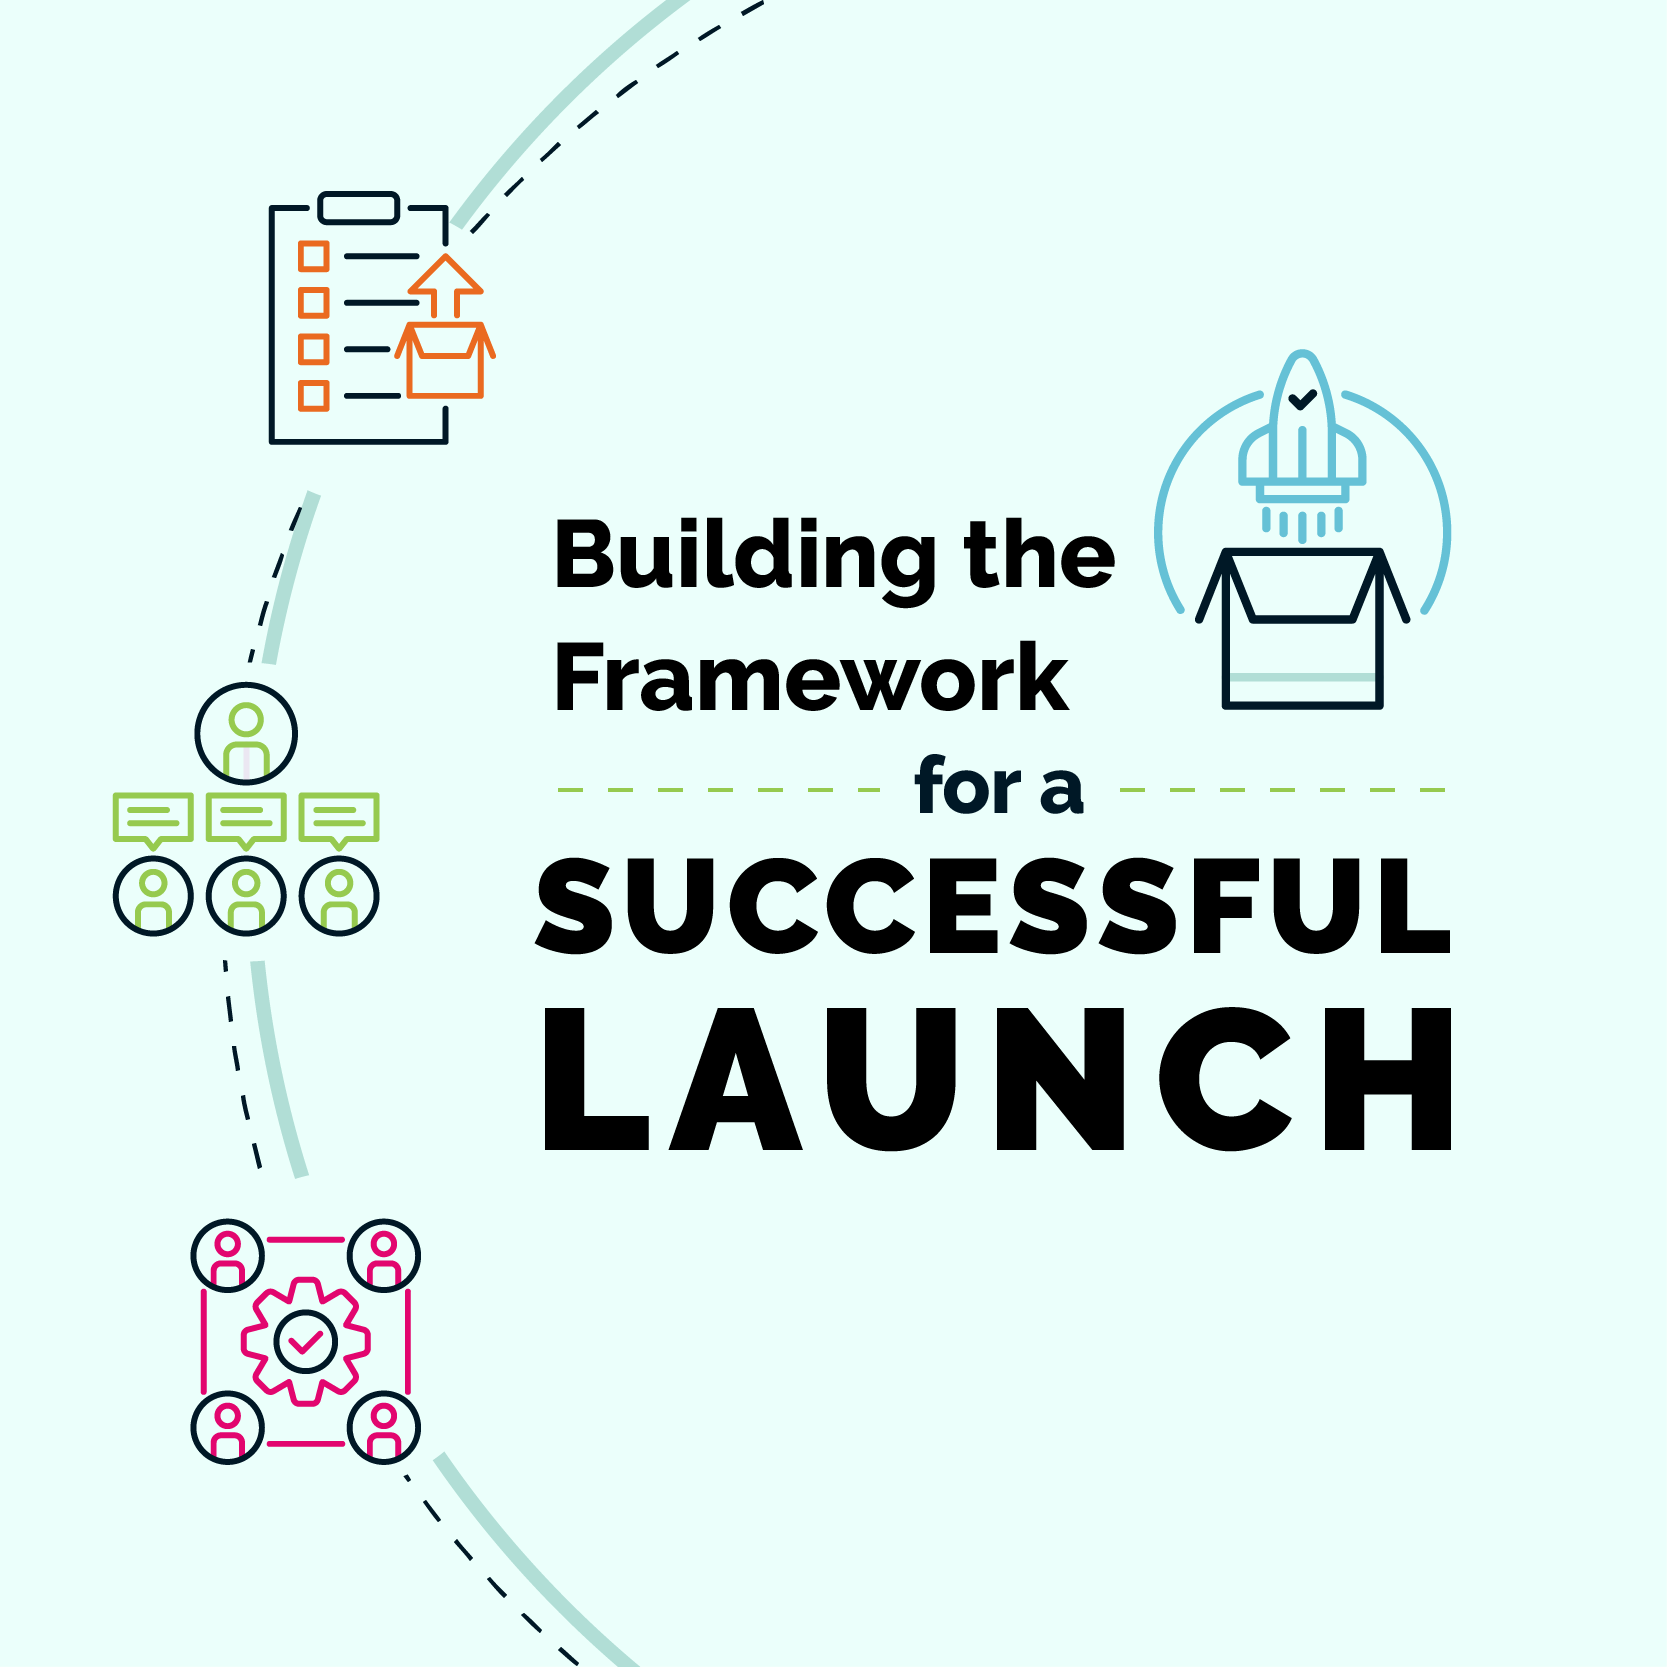 Building the Framework for a Successful Launch